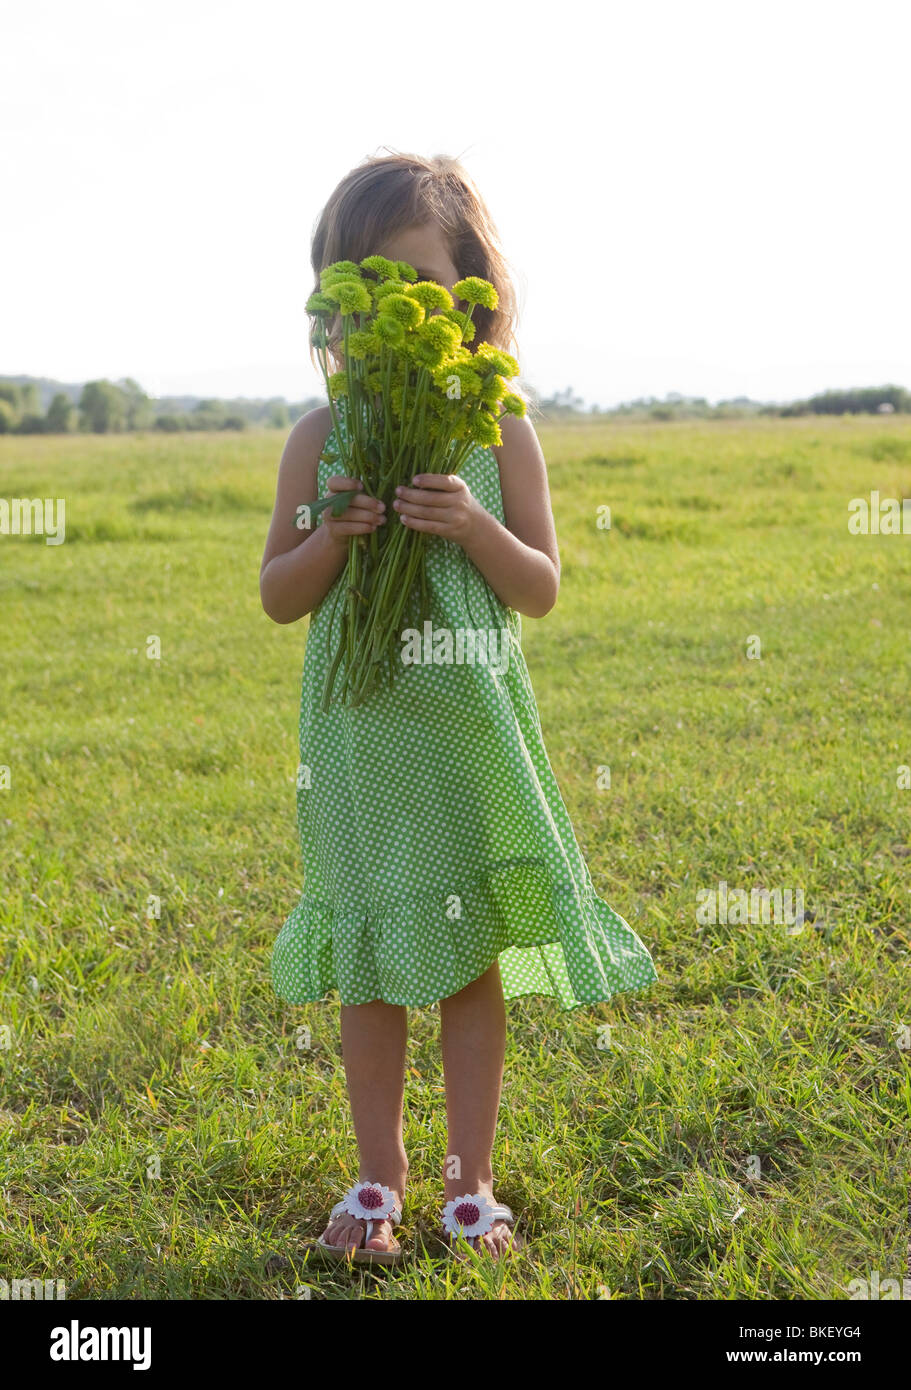 Girl holding bouquet of flowers Stock Photo